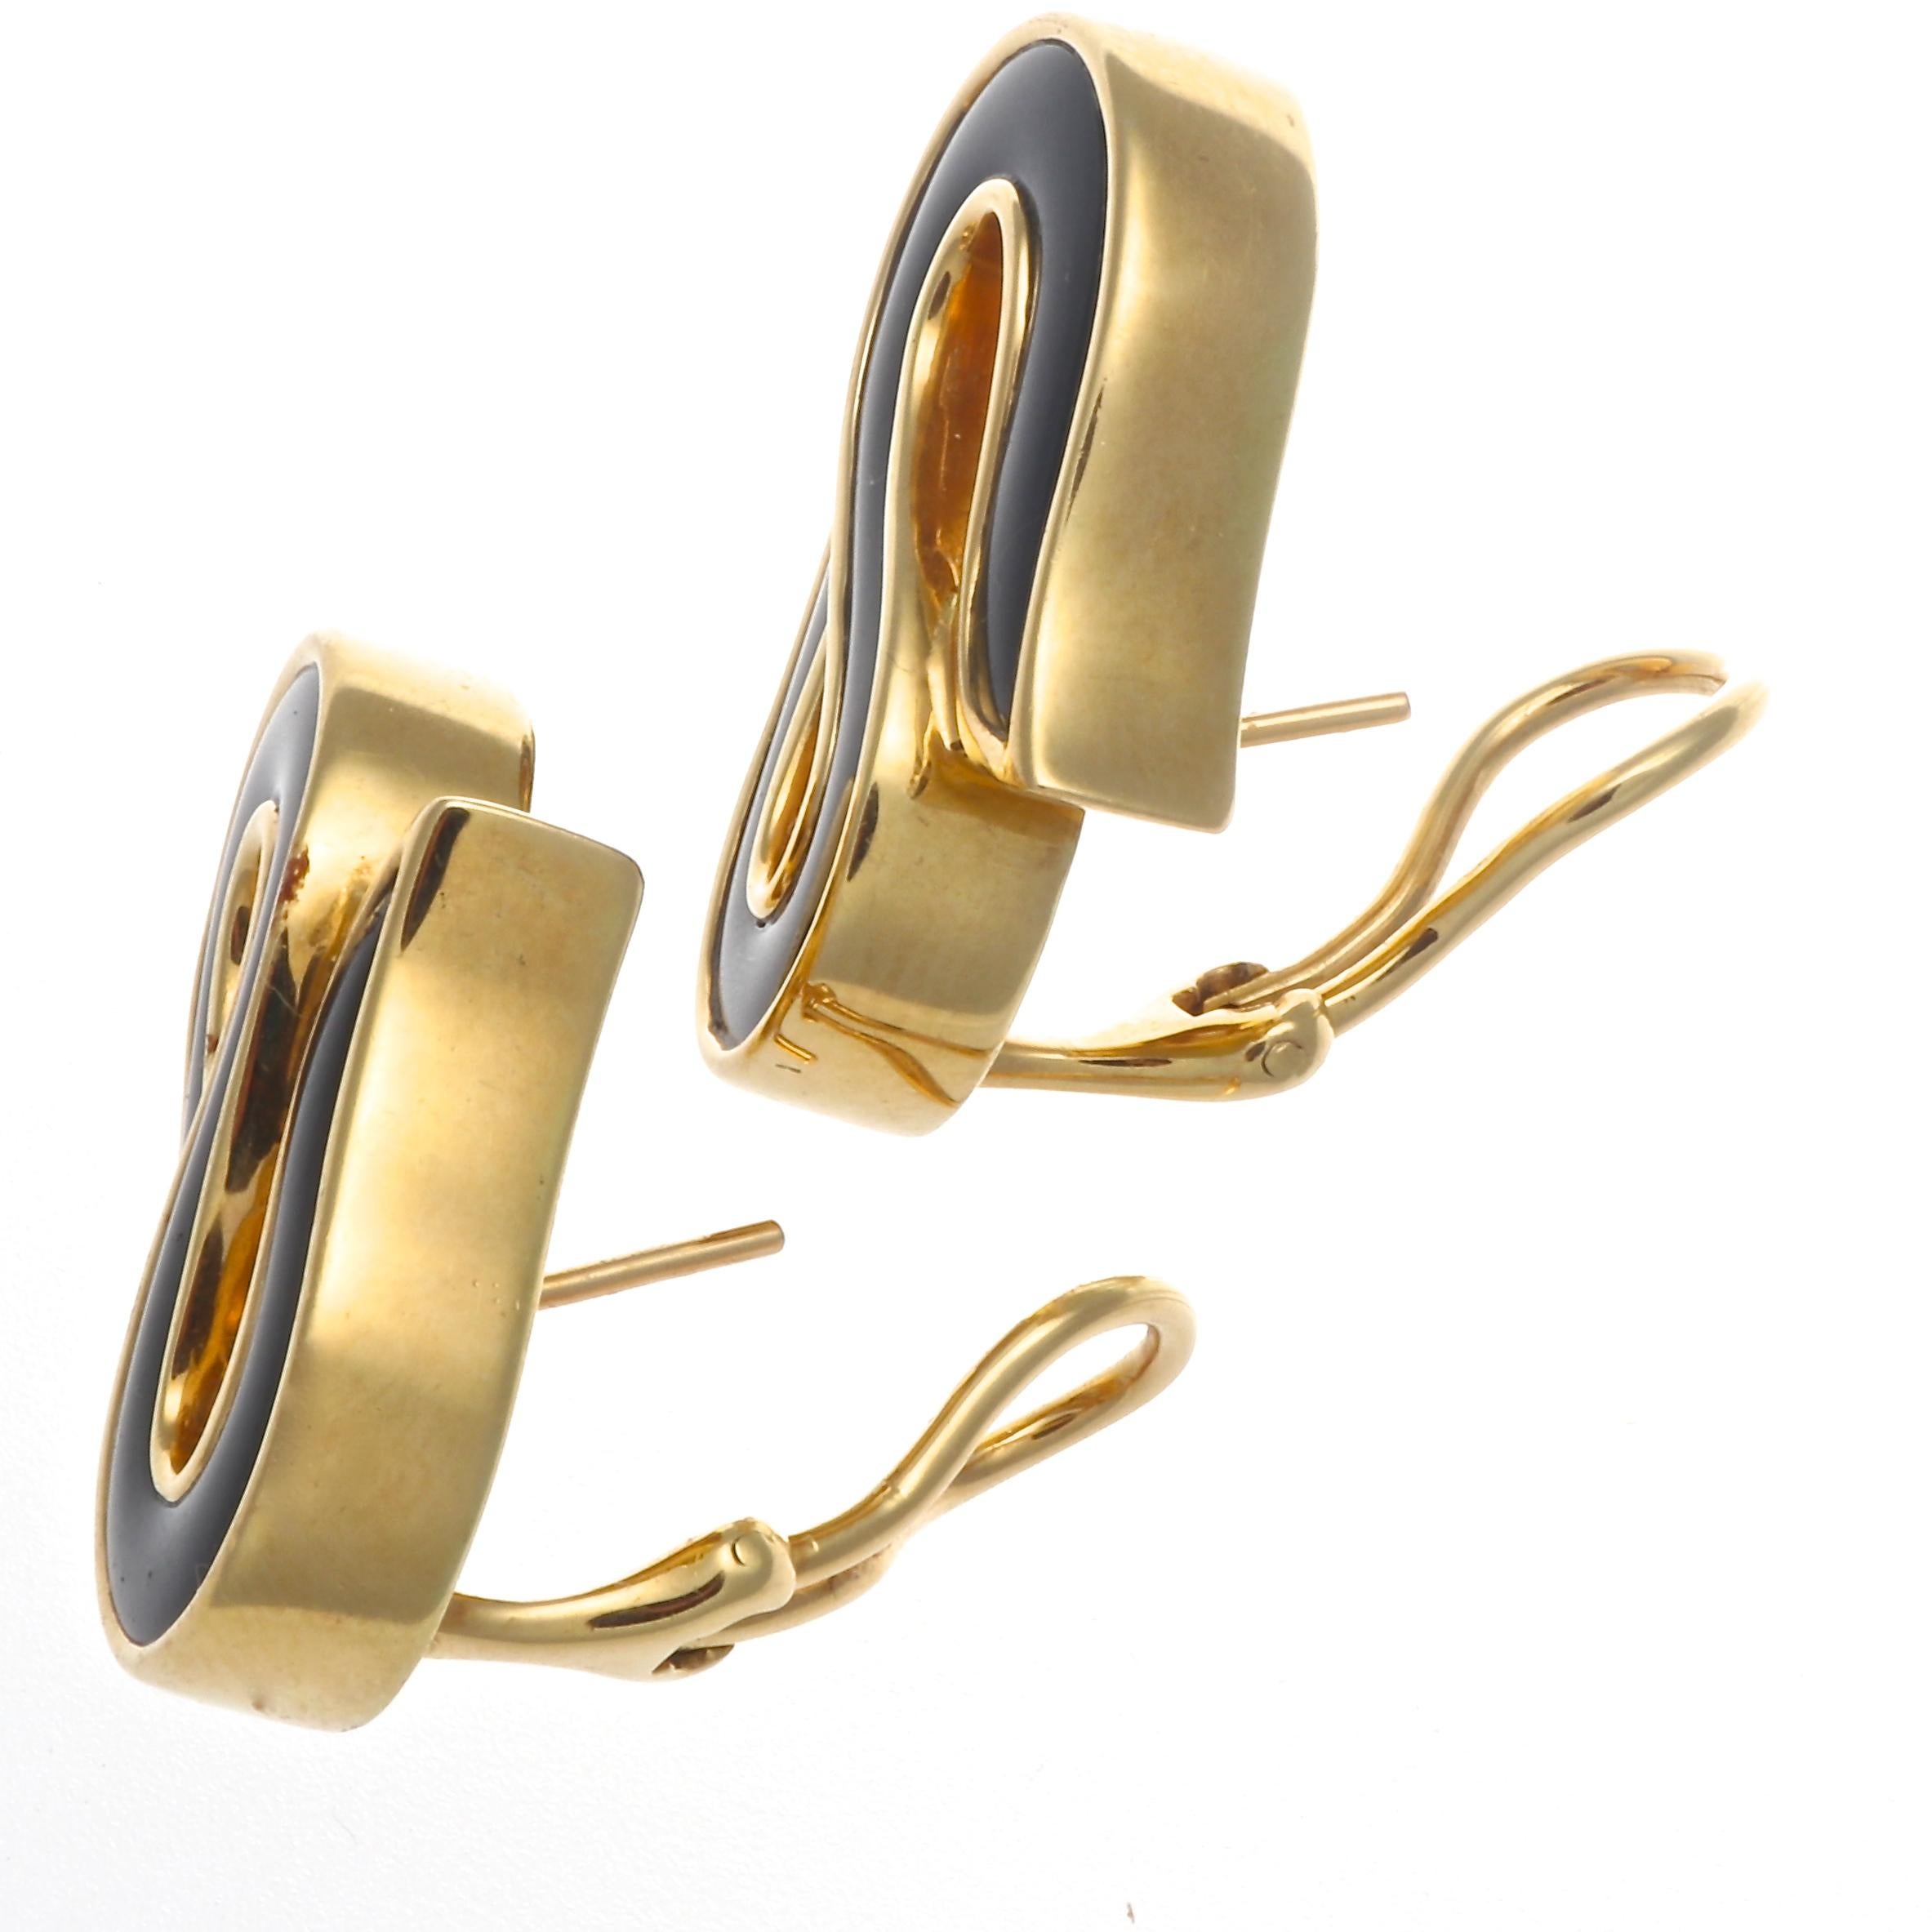 Vintage Angela Cummings enamel 18k yellow gold earrings. Signed Angela Cummings. Circa 1960s.
Our 1stdibs Recognized Dealer/Platinum Seller Guarantees: 
7 day return policy for full cash refund
30 day return for store credit 
Free shipping both